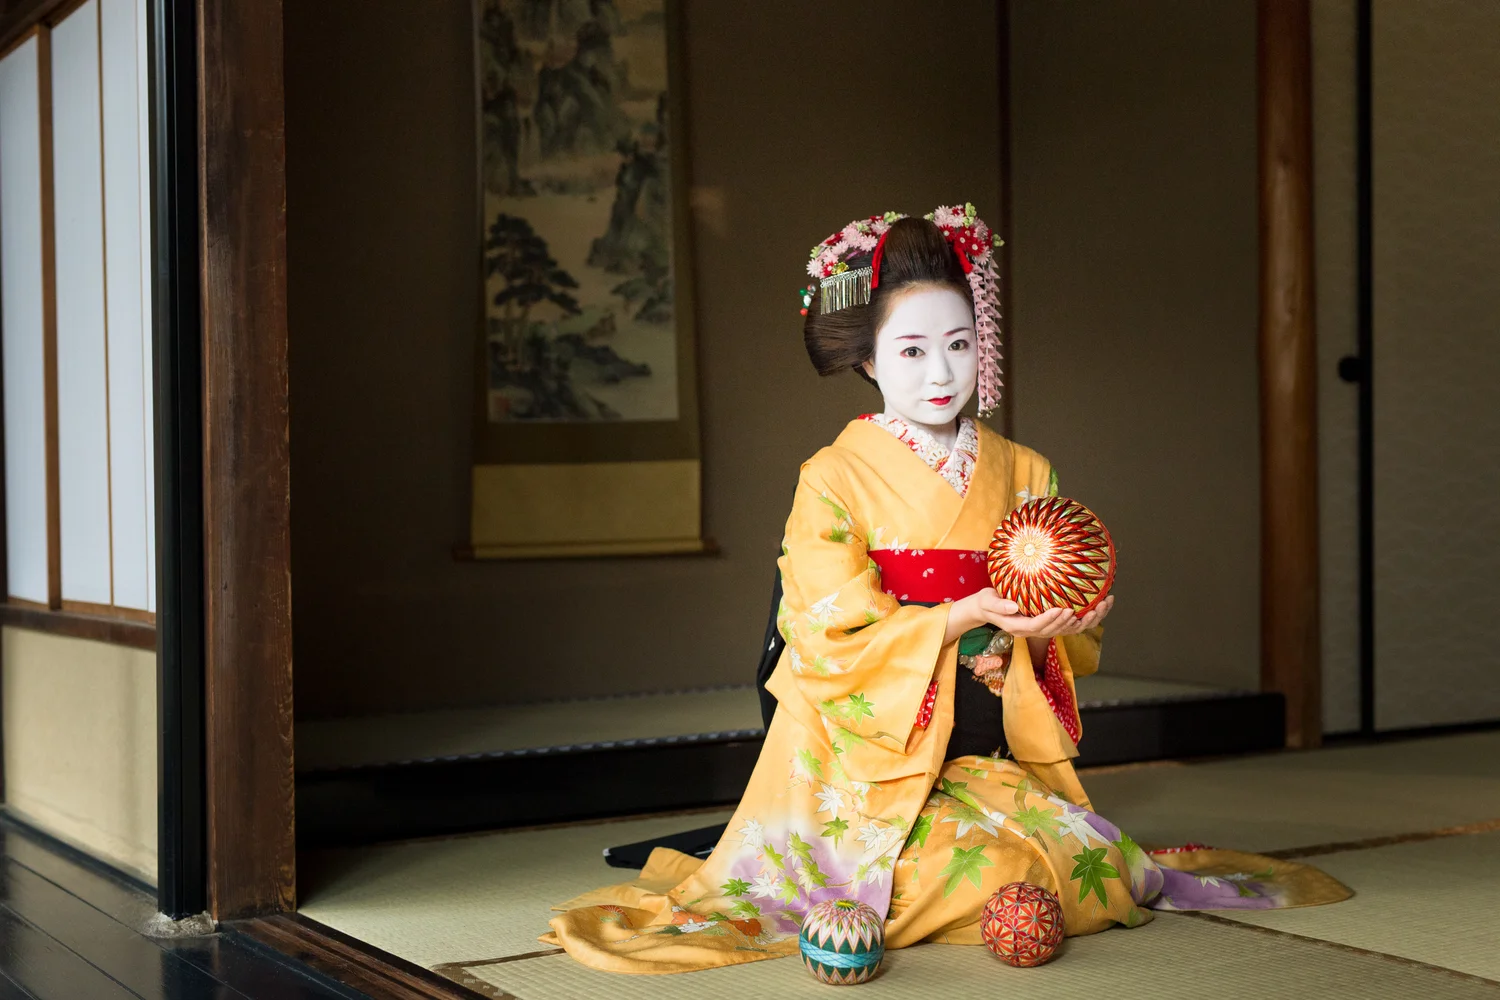 Try a complete Maiko makeover in Kyoto